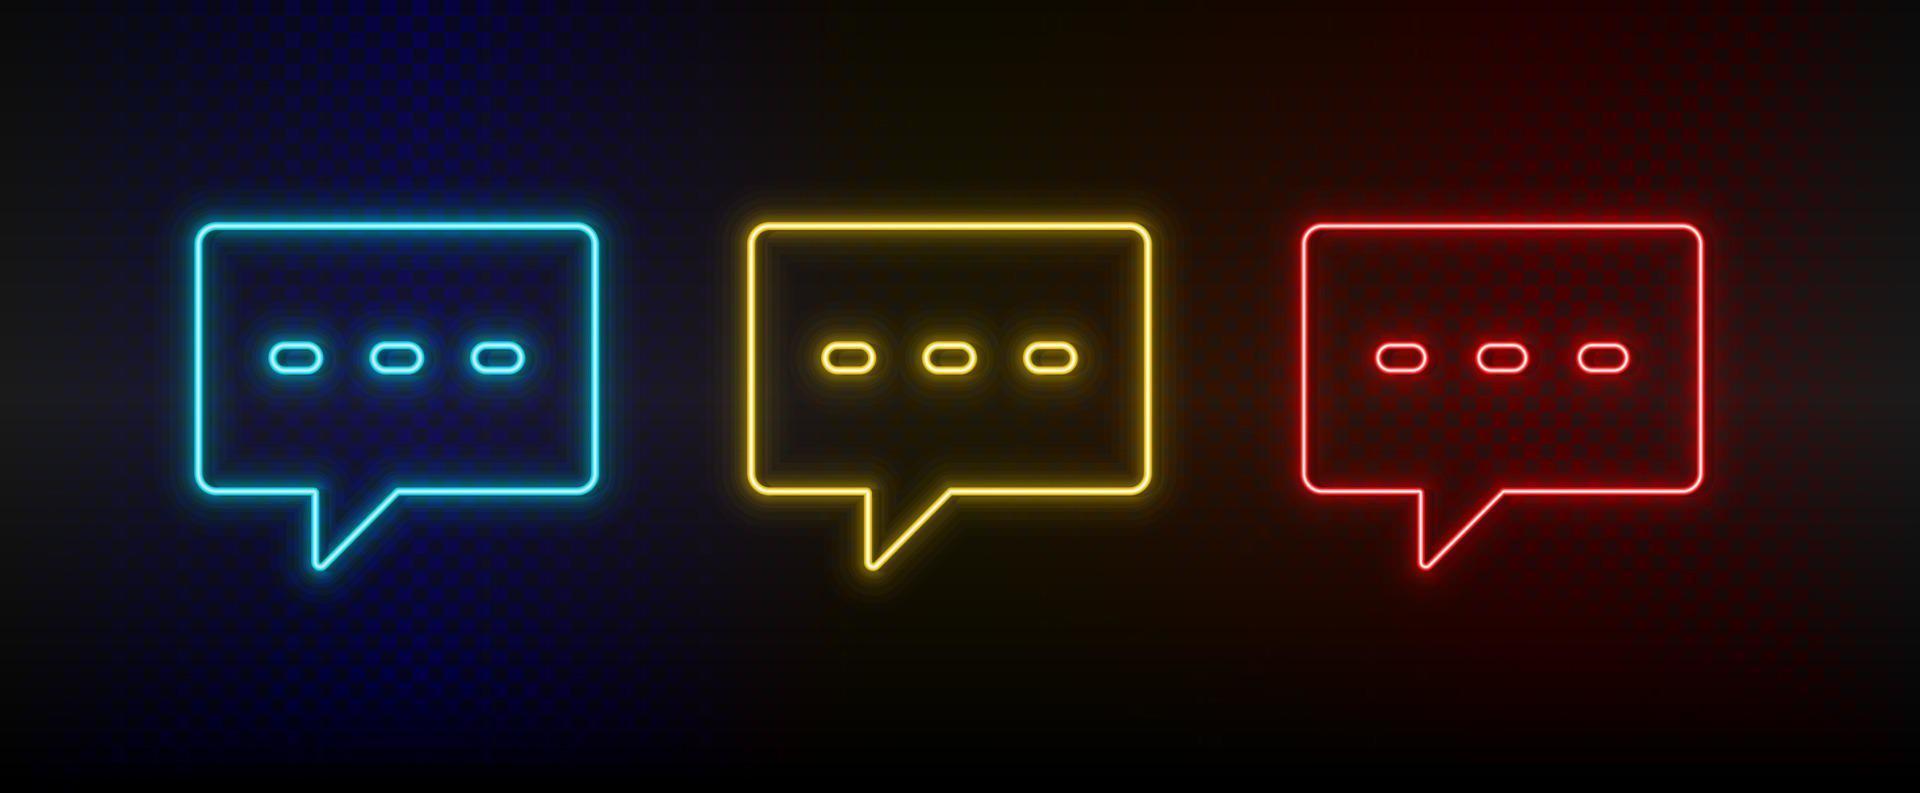 Neon icon set chat, chat bubble. Set of red, blue, yellow neon vector icon on dark transparent background